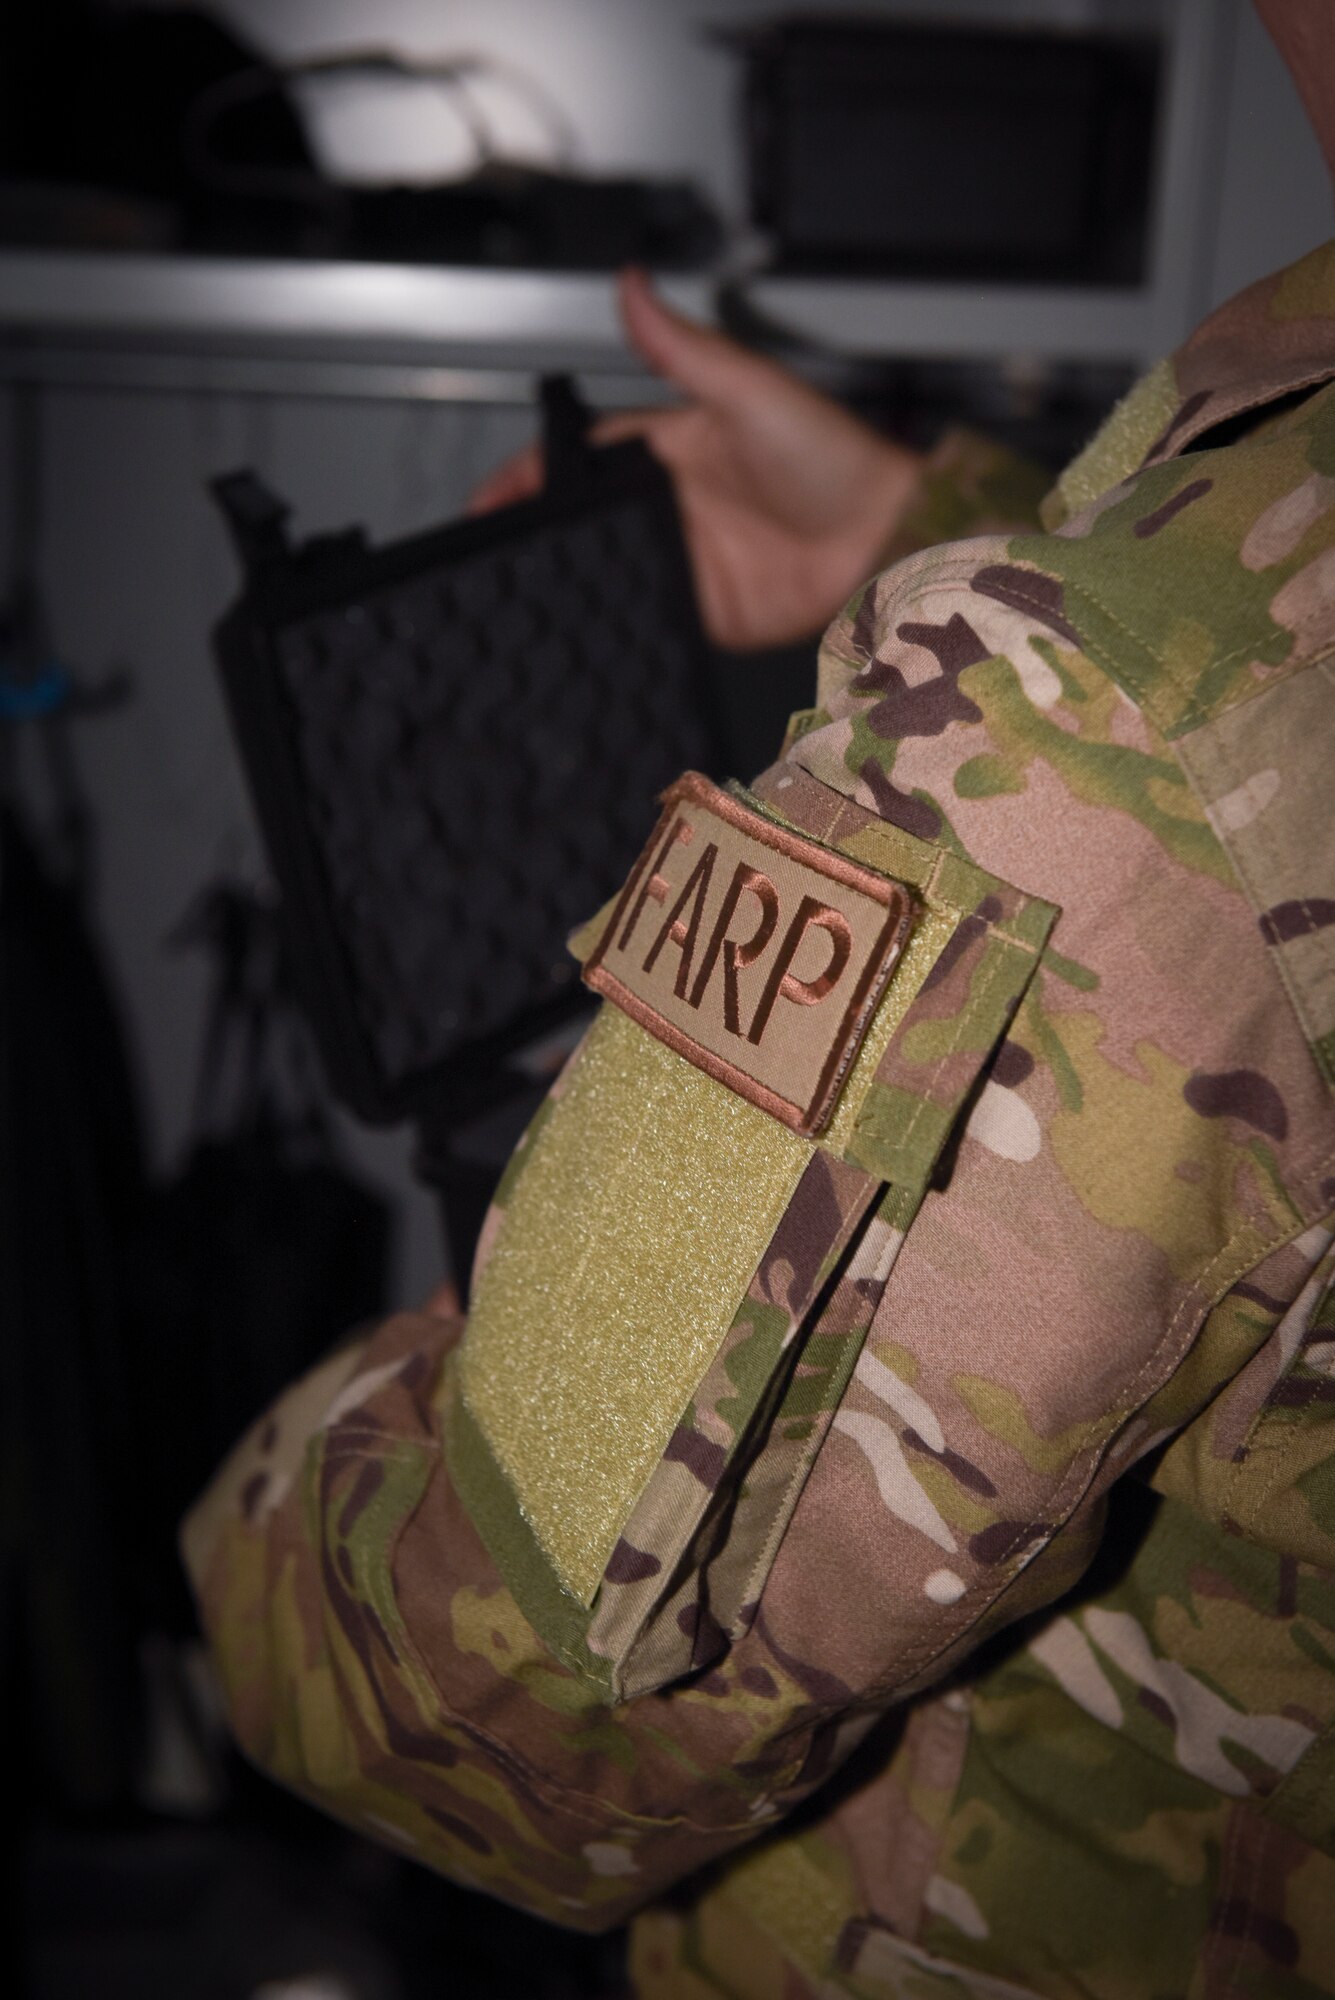 U.S. Air Force Senior Airman Tori Watts, 100th Logistics Readiness Squadron fuels distribution driver and 67th Special Operations Squadron Forward Arming and Refueling Point team member, packs up equipment for a FARP mission at RAF Mildenhall, England, Oct. 11, 2018. The 100th Logistics Readiness Squadron and the 67th SOS have teams of fuels Airmen who provide a critical capability for wartime and humanitarian missions, by provide a means of "hot" refueling from a tanker aircraft. (U.S. Air Force photo by Airman 1st Class Alexandria Lee)